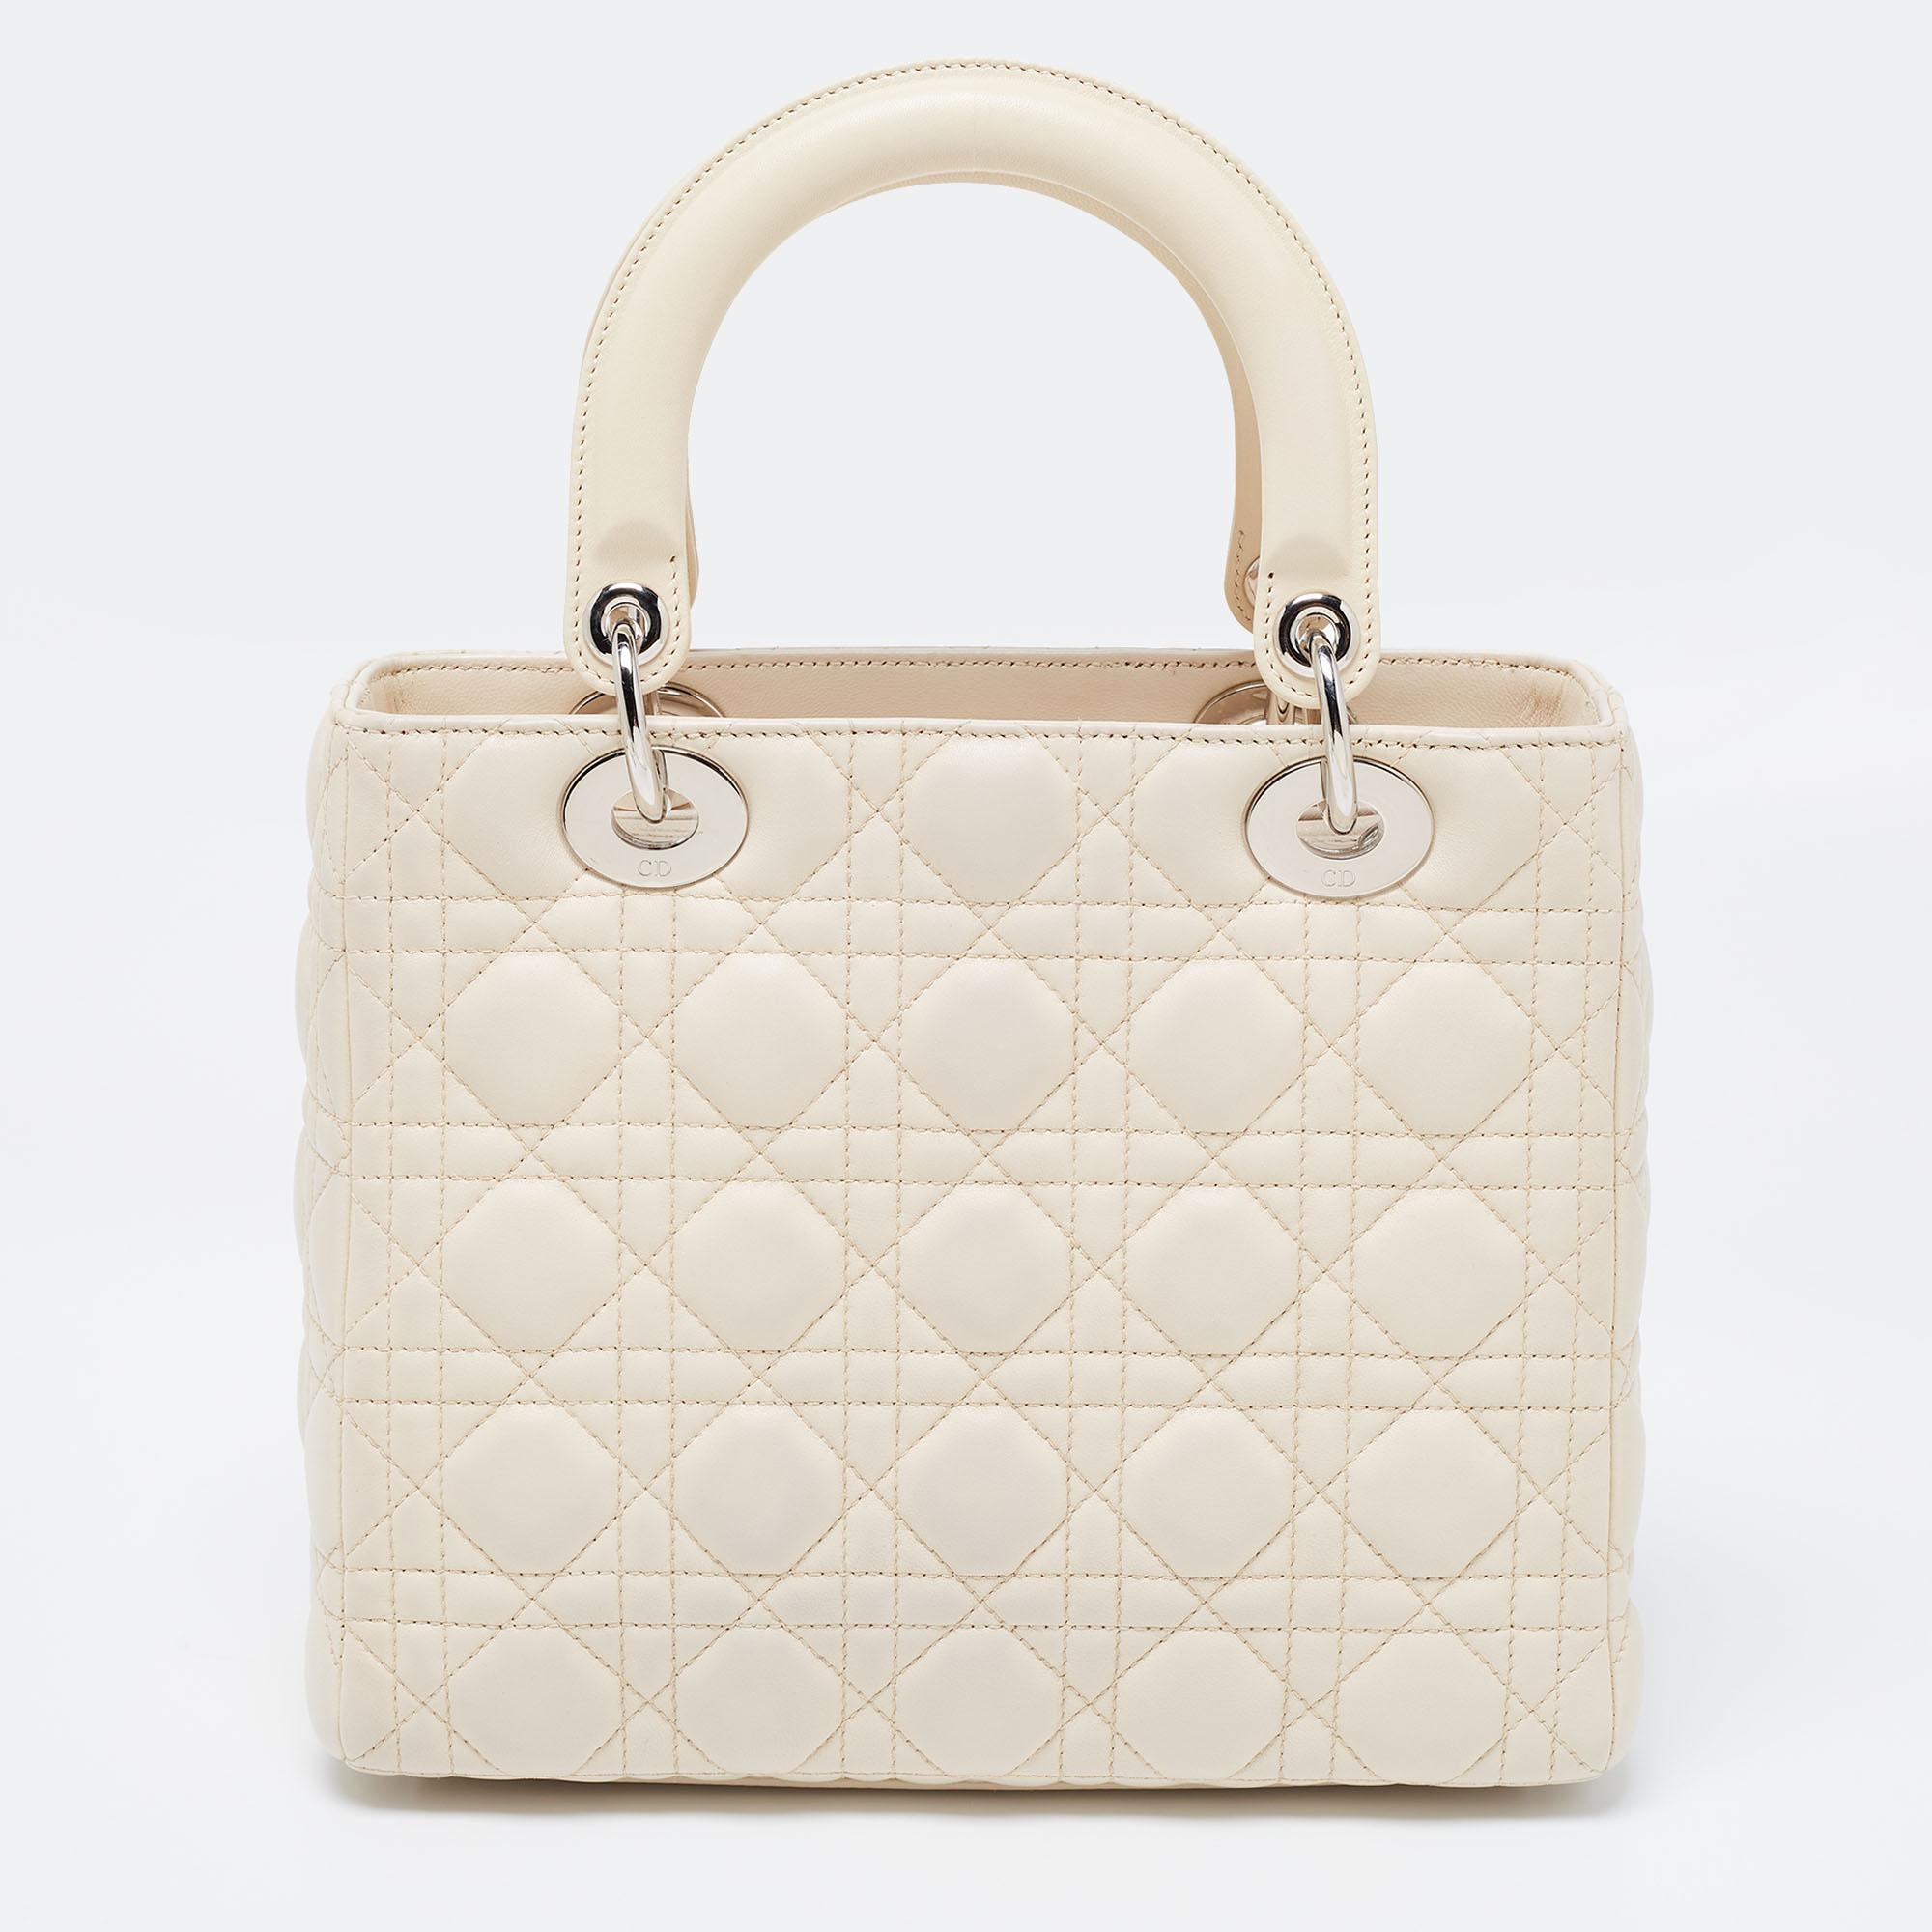 The Lady Dior tote is a Dior creation that has gained wide recognition is a coveted bag that every fashionista wants to possess. The beige tote has been crafted from patent leather and carries the signature Cannage quilt. It is equipped with a nylon